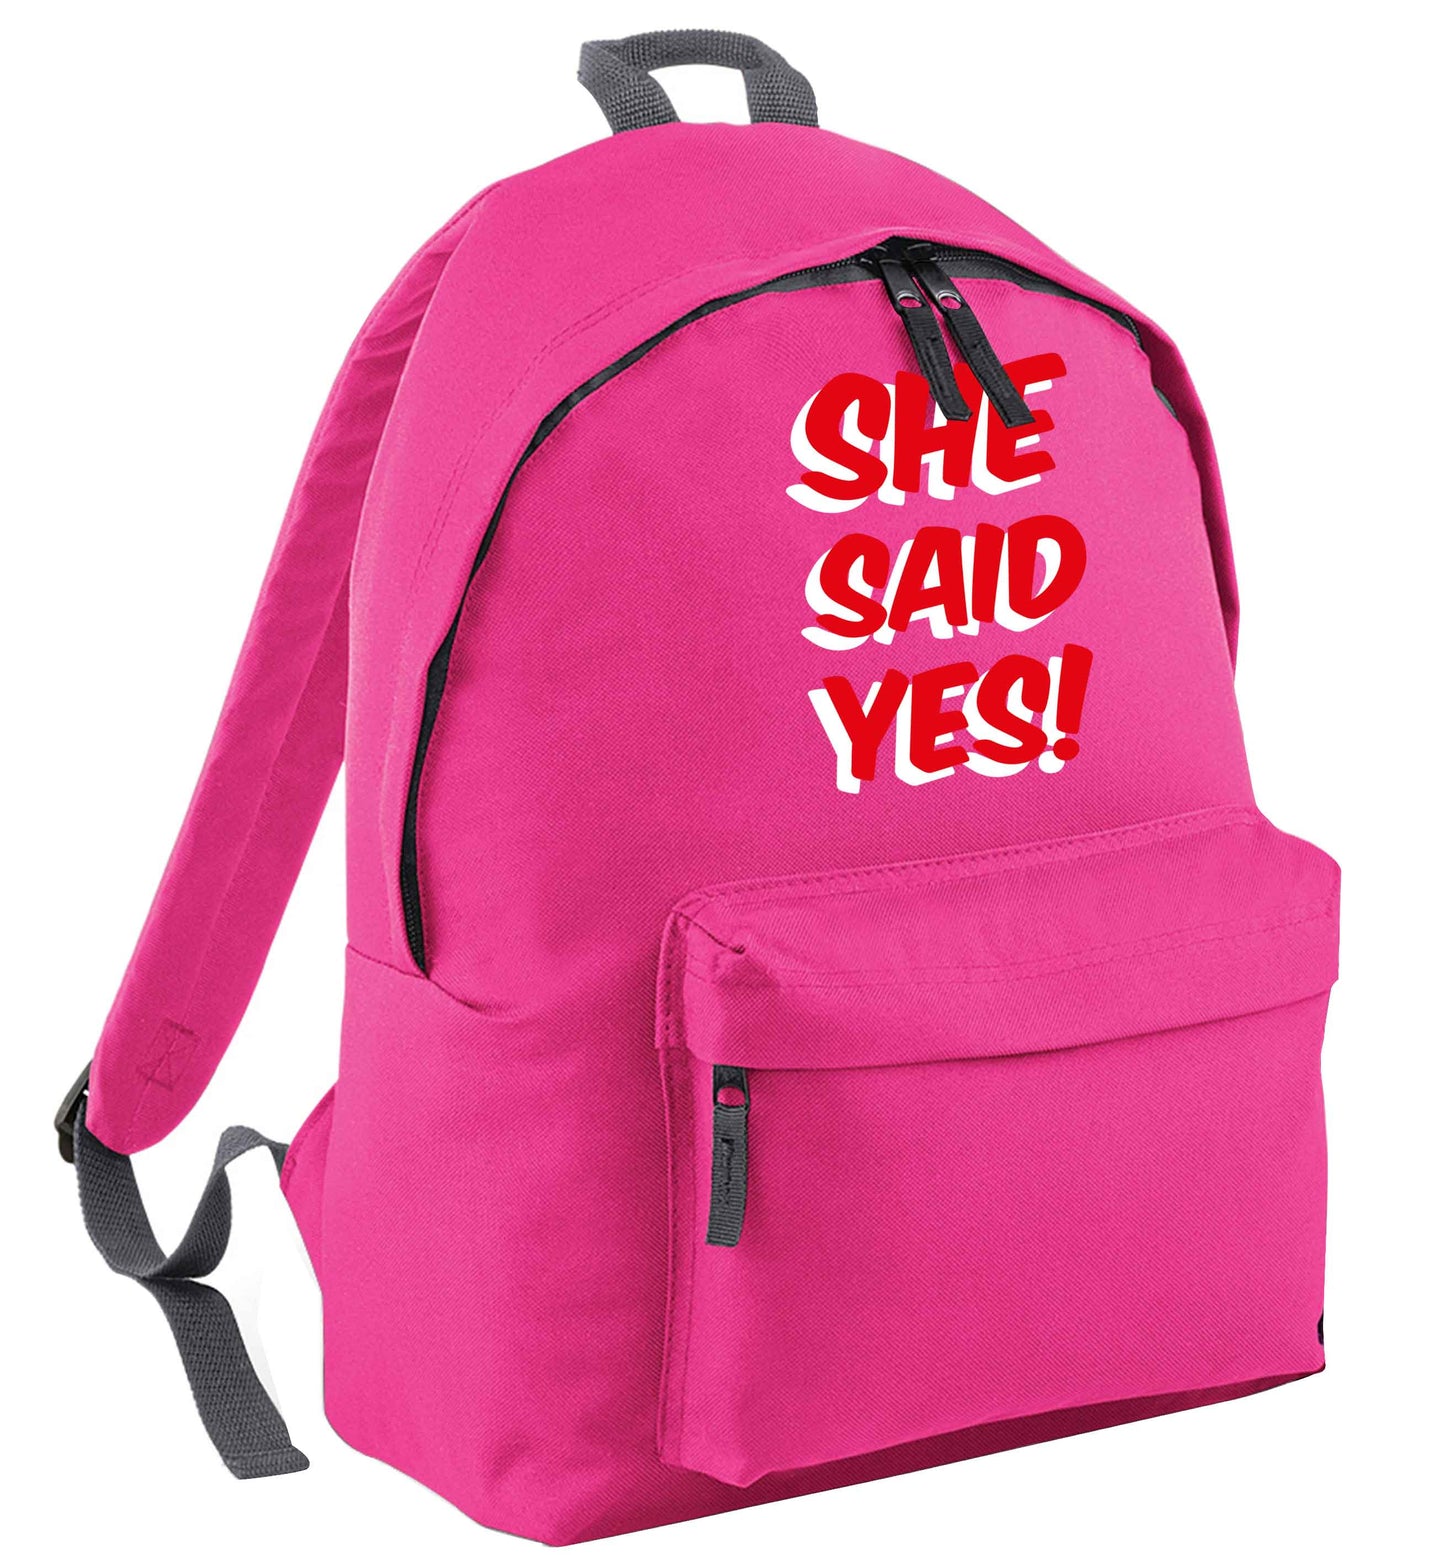 She said yes pink adults backpack